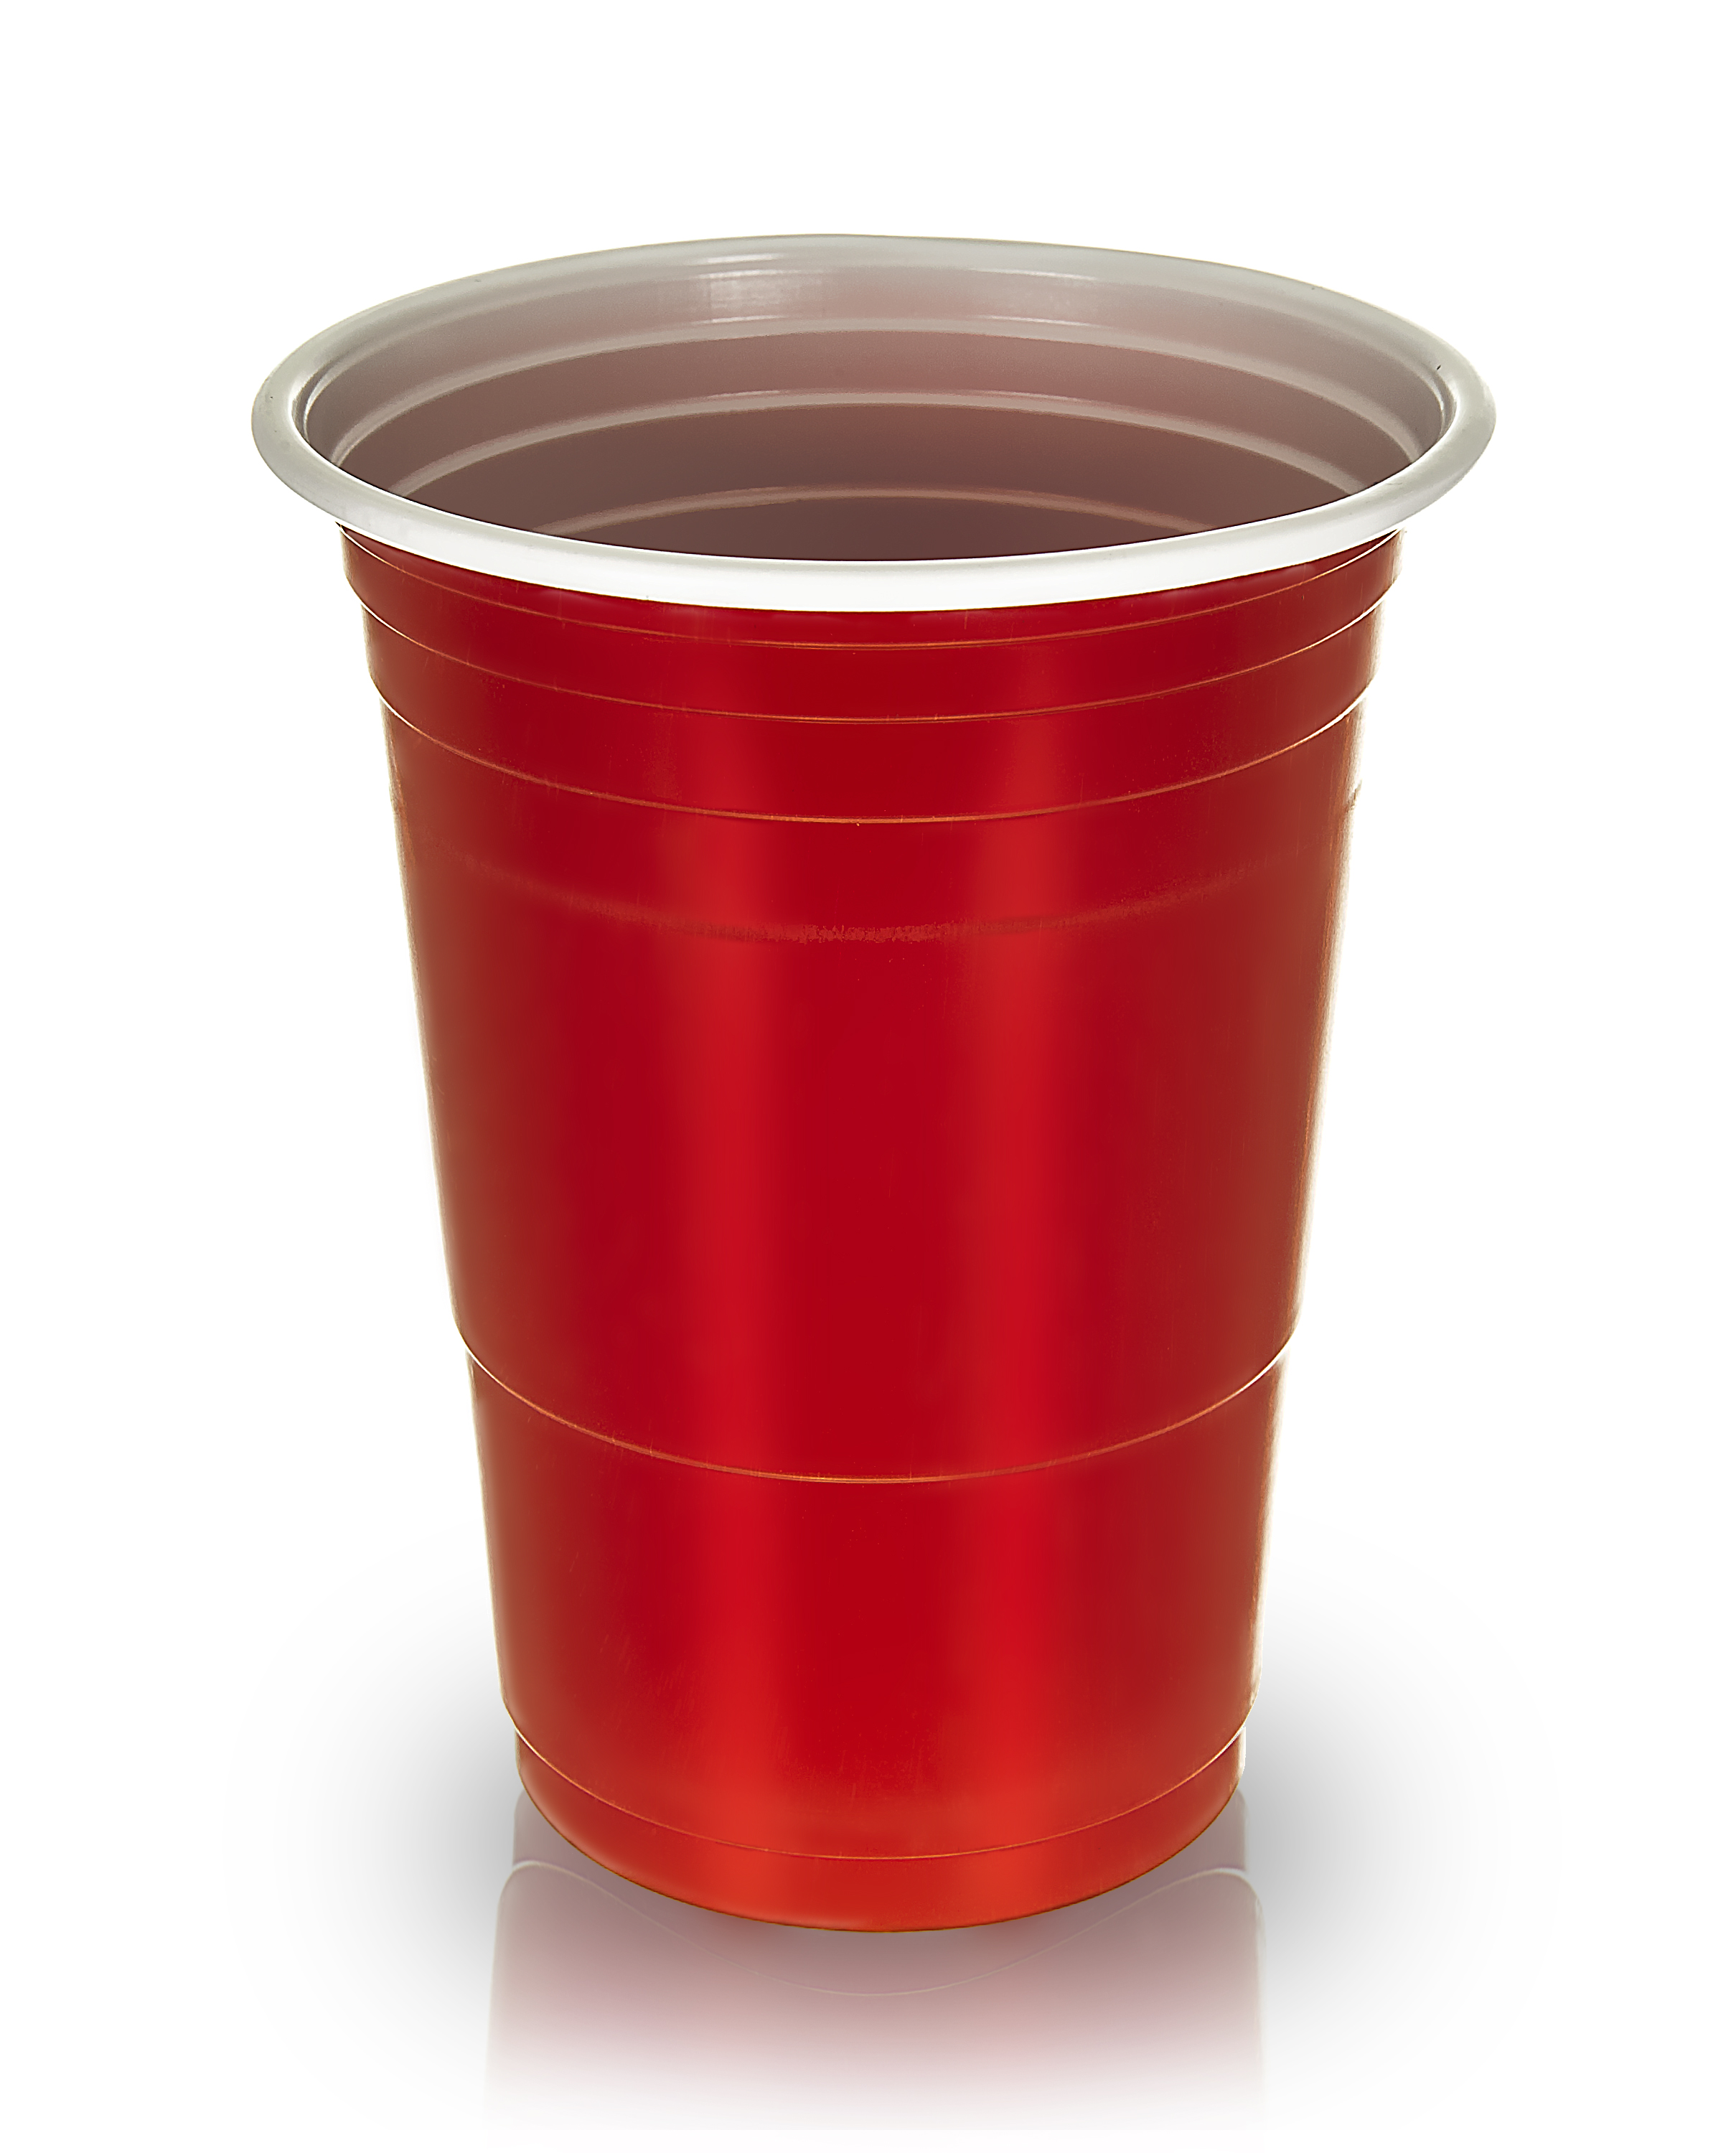 AMERICAN 16OZ PLASTIC  RED  PARTY  CUPS  BEER PONG 